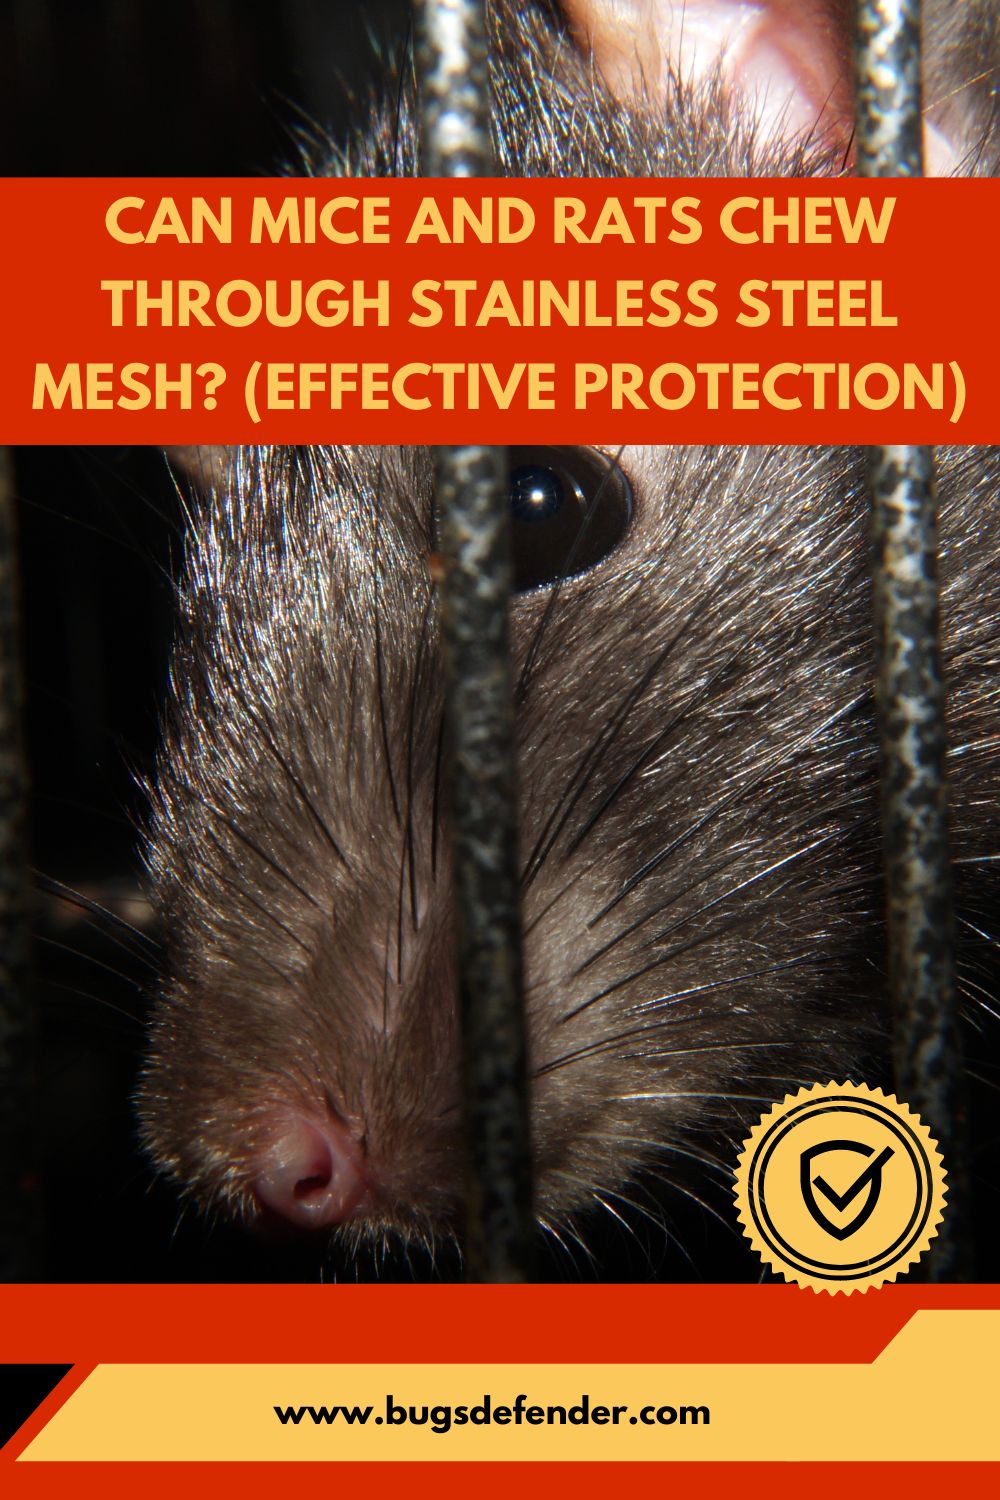 Can Mice and Rats Chew Through Stainless Steel Mesh? (Effective Protection) pin 2